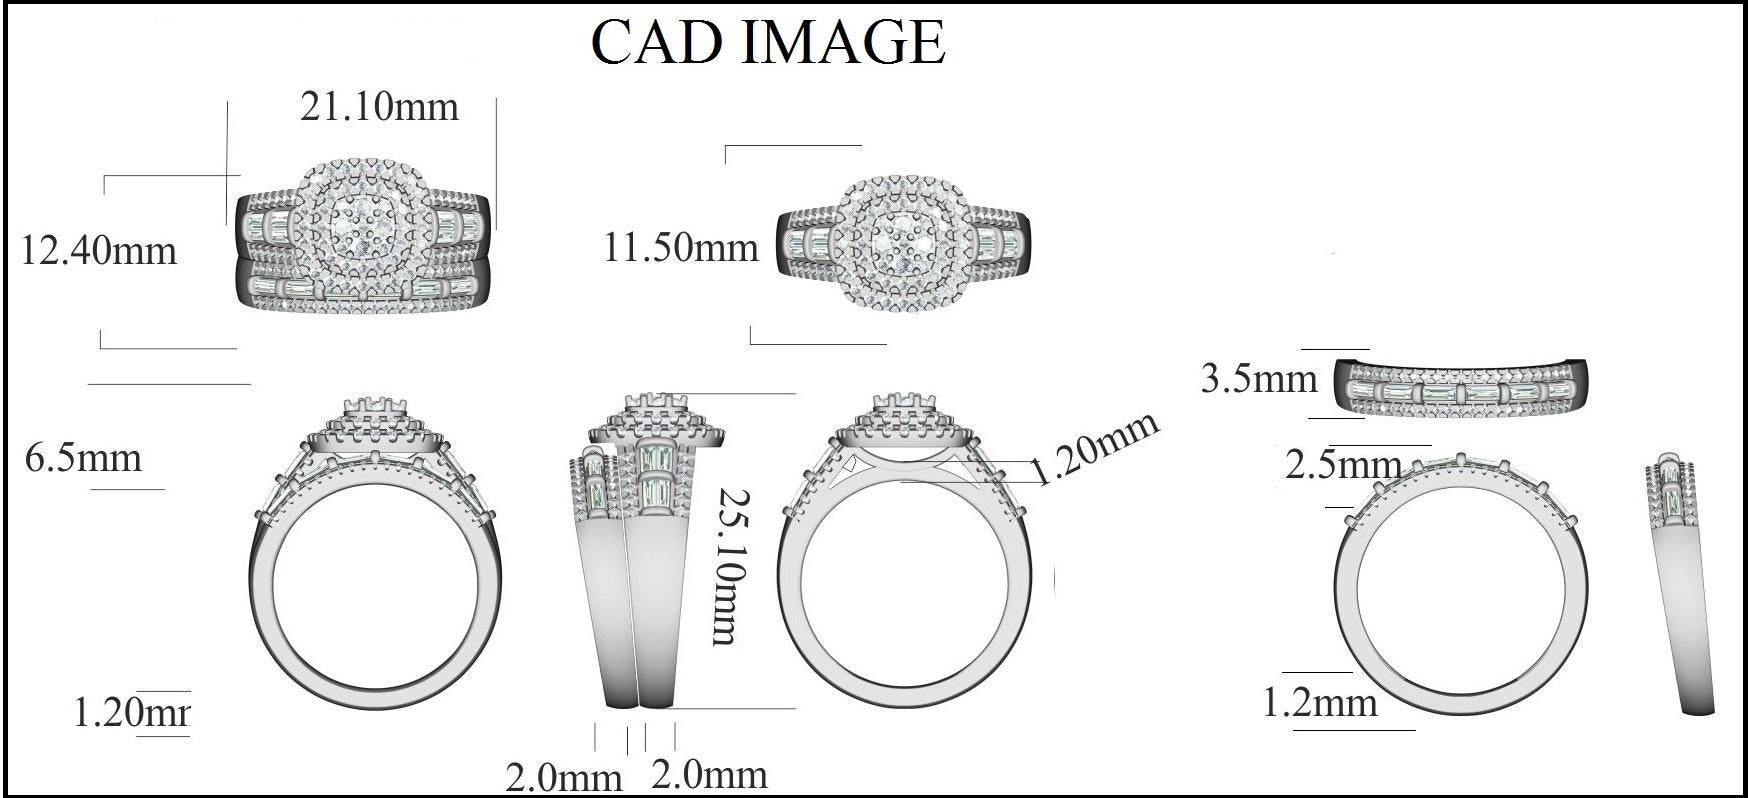 This timeless design diamond bridal set ring celebrates your next steps in life. The ring is crafted from 14-karat white gold and features Round Brilliant 115 and Baguette - 14 white diamonds, Micro Prong Prong & Channel set, H-I color I2 clarity